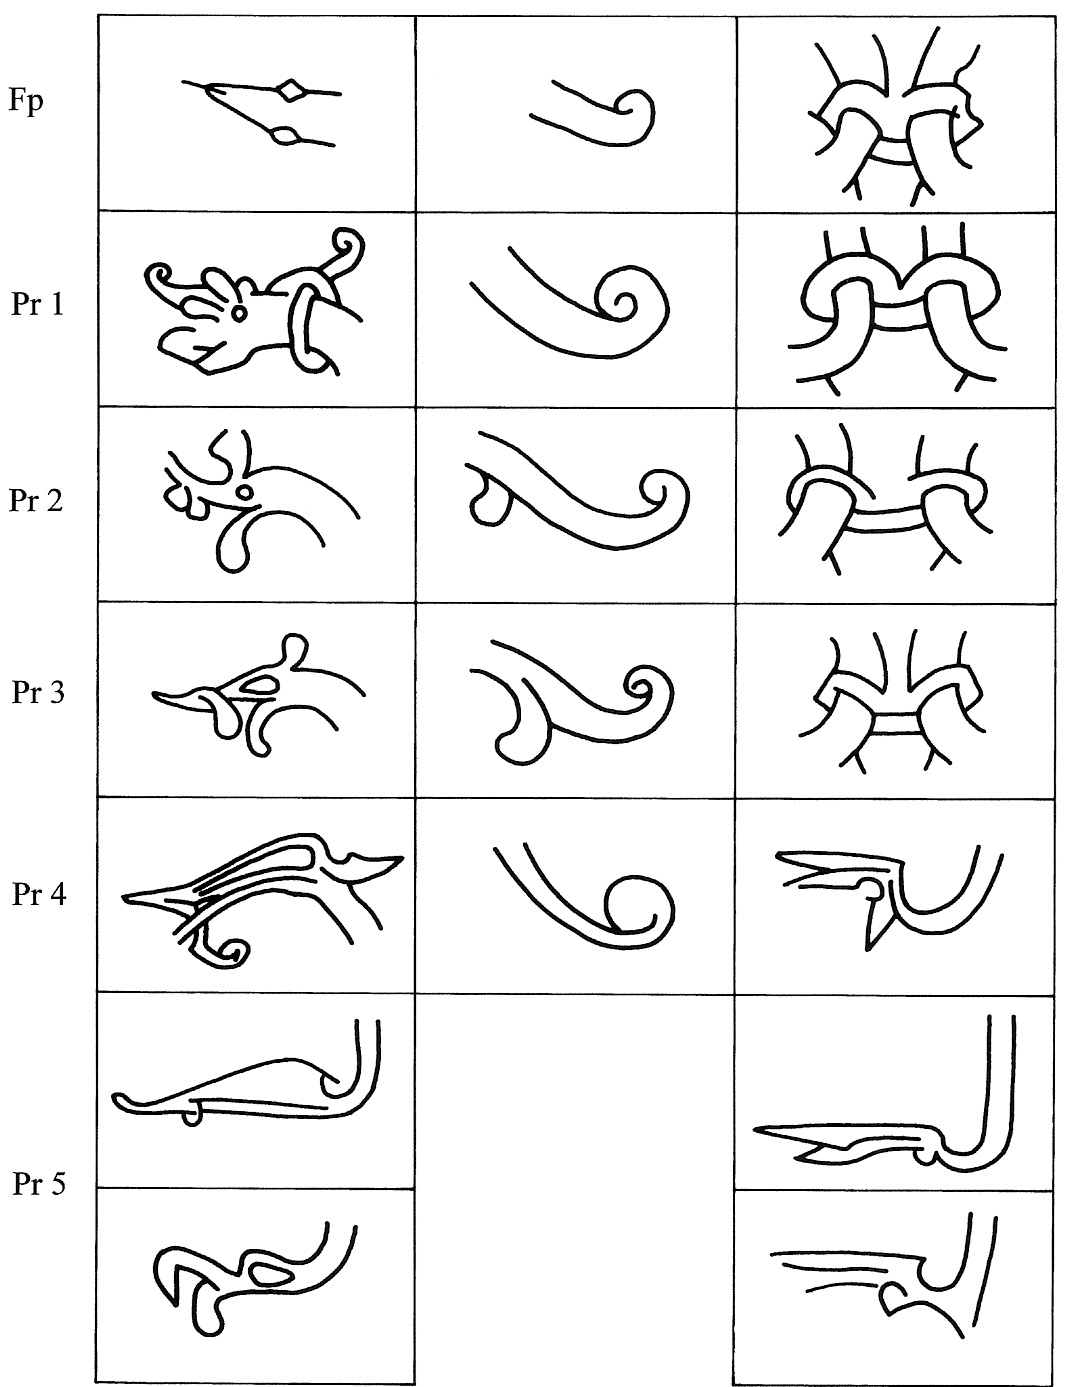 Style groups according to A-S Gräslund’s system for Viking Age runestones